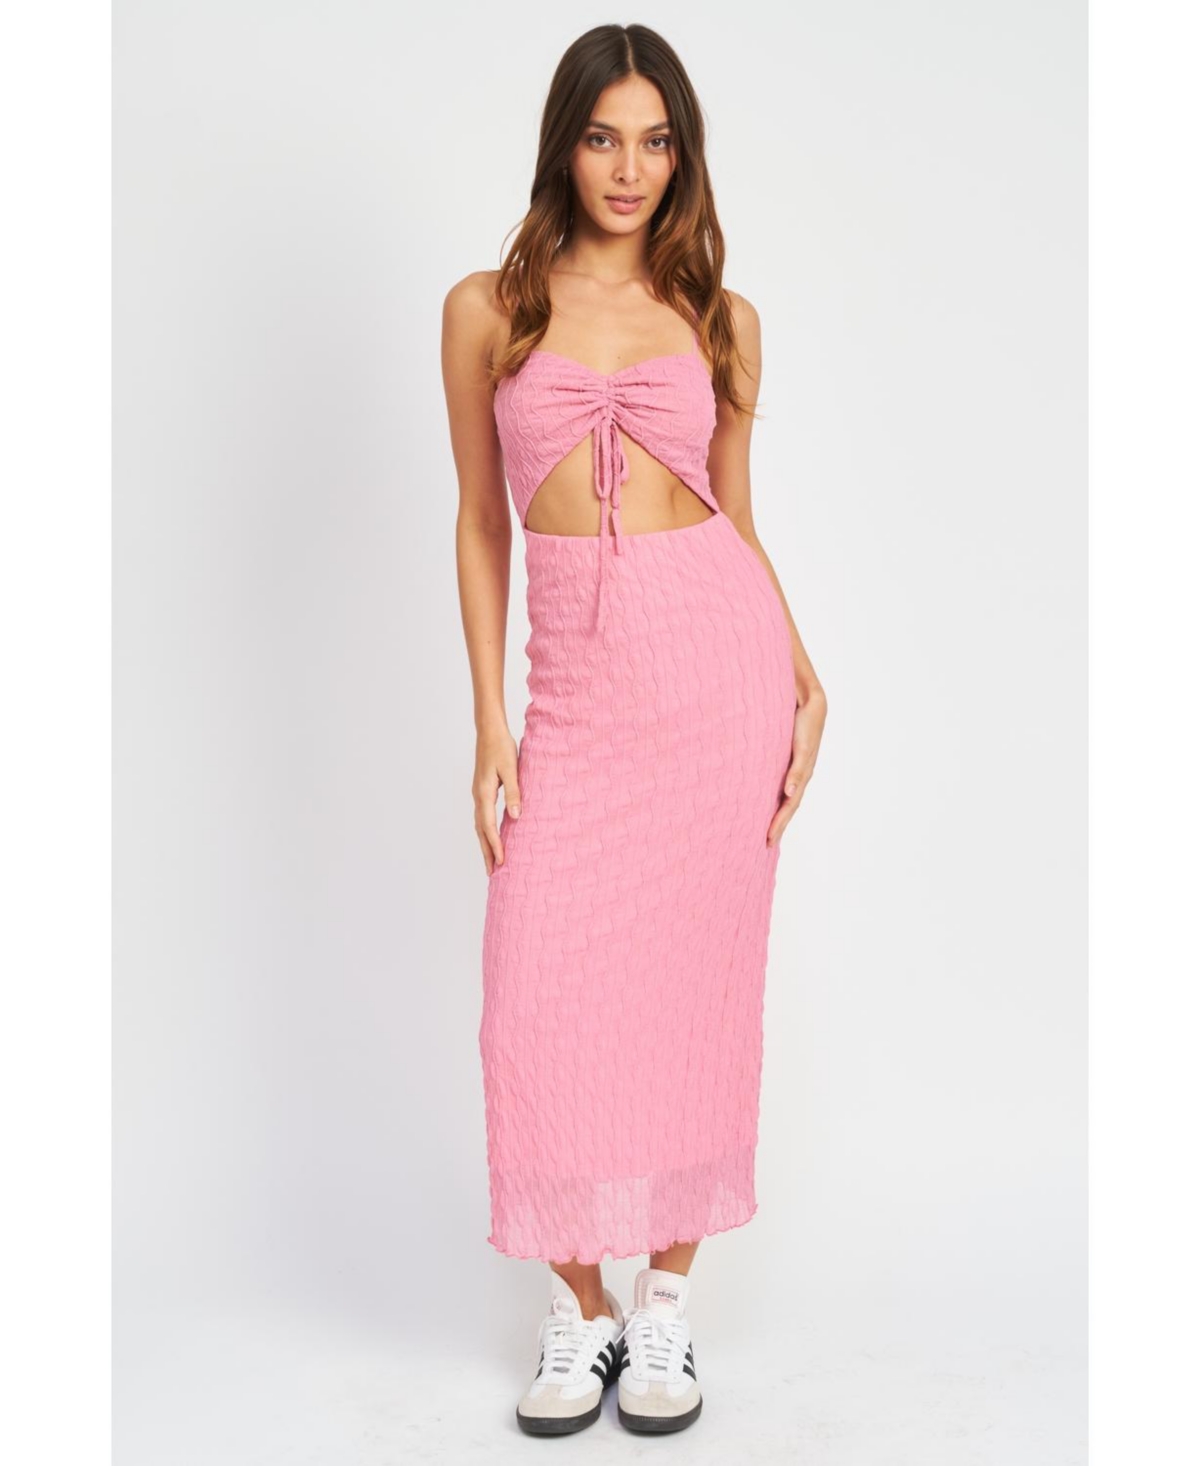 Emory Park Kennedy Midi Dress In Pink